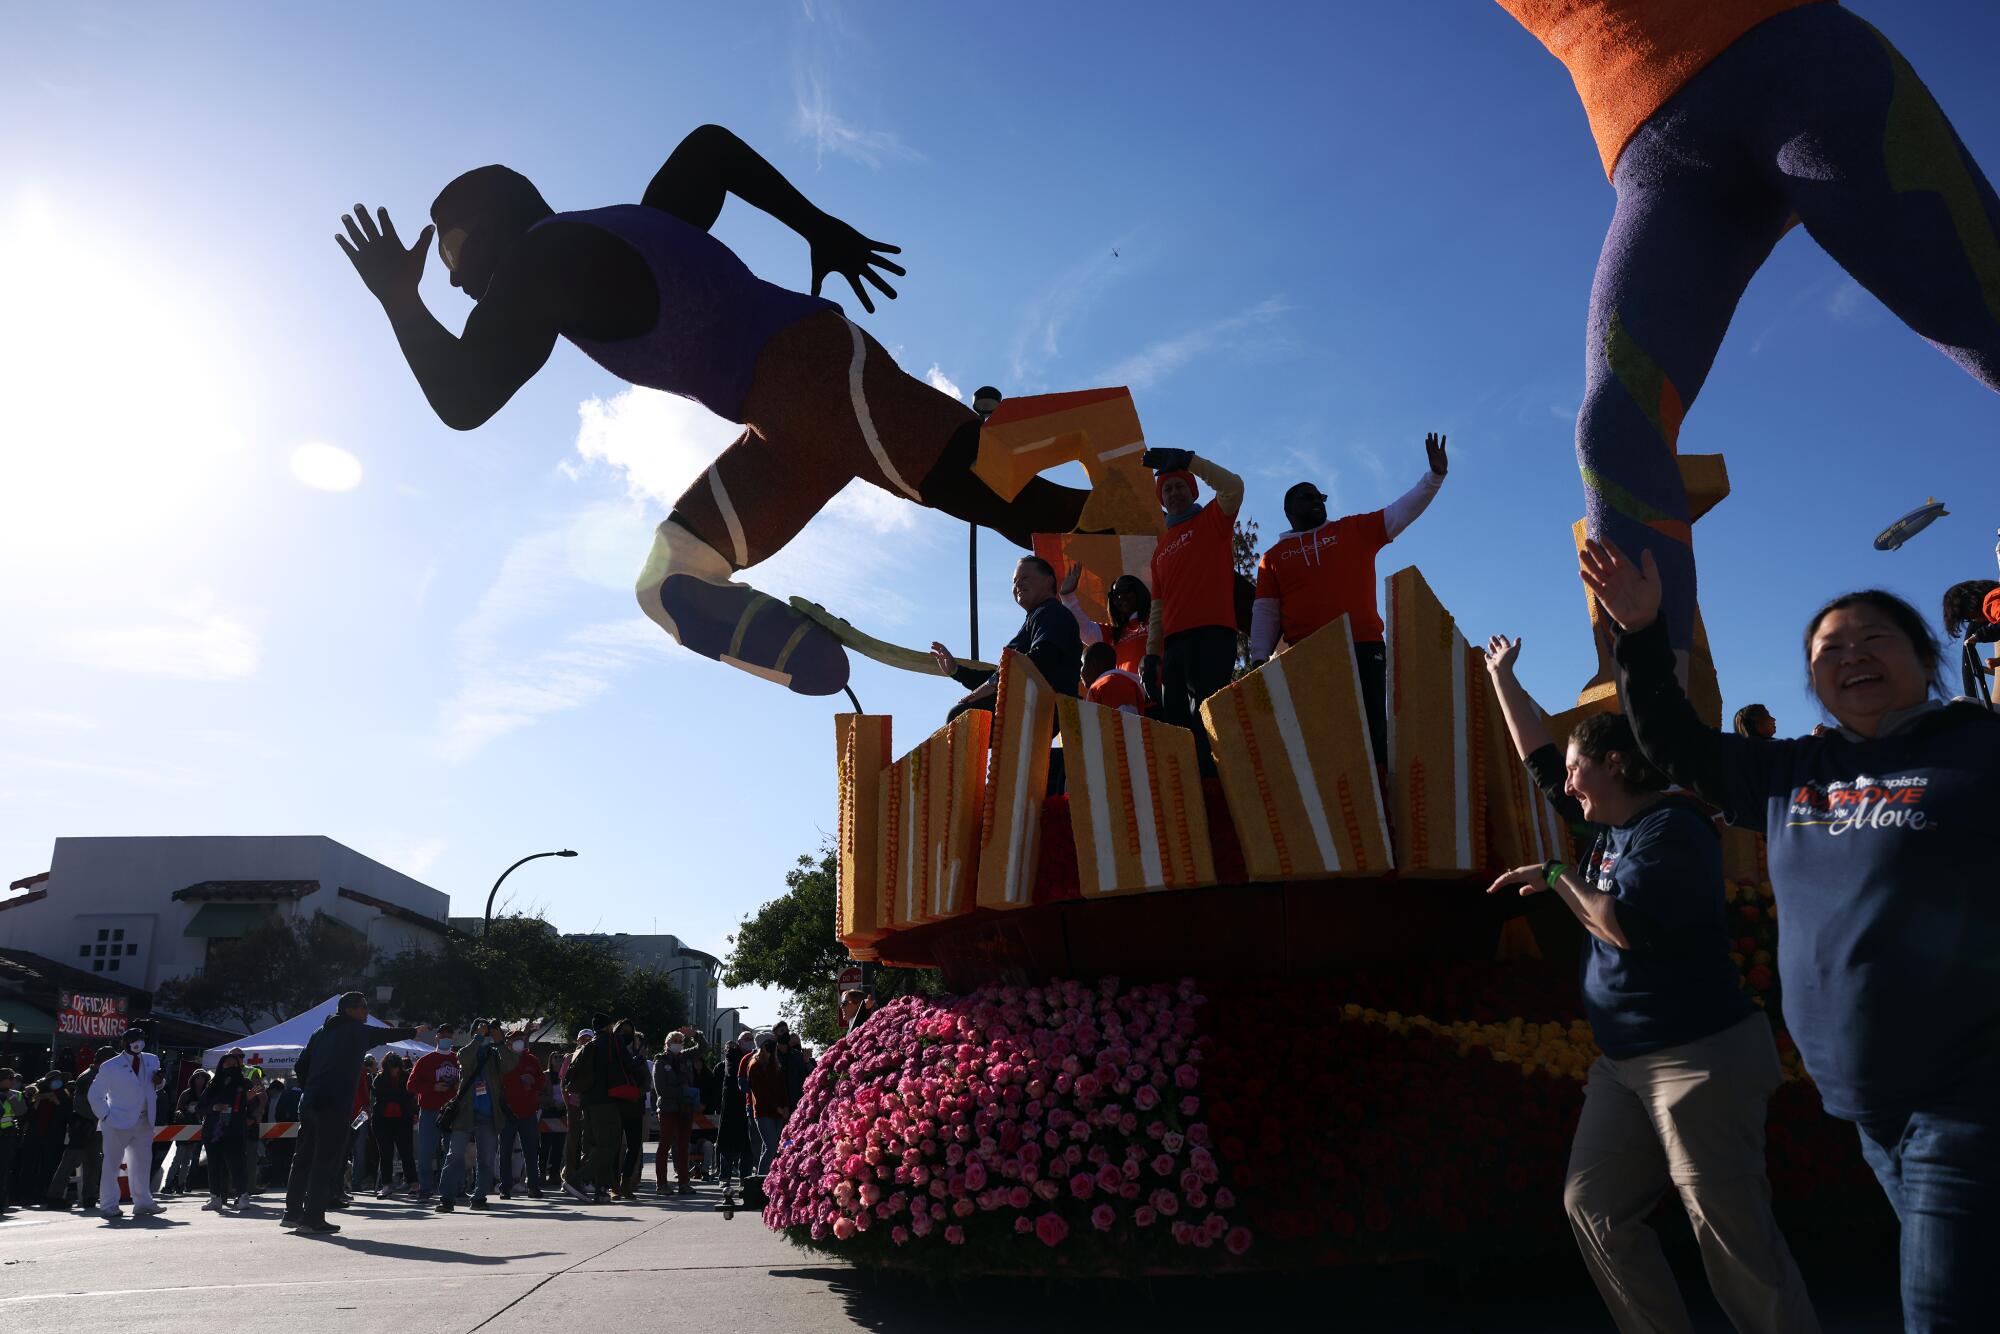 The California Physical Therapy Assn.'s float.